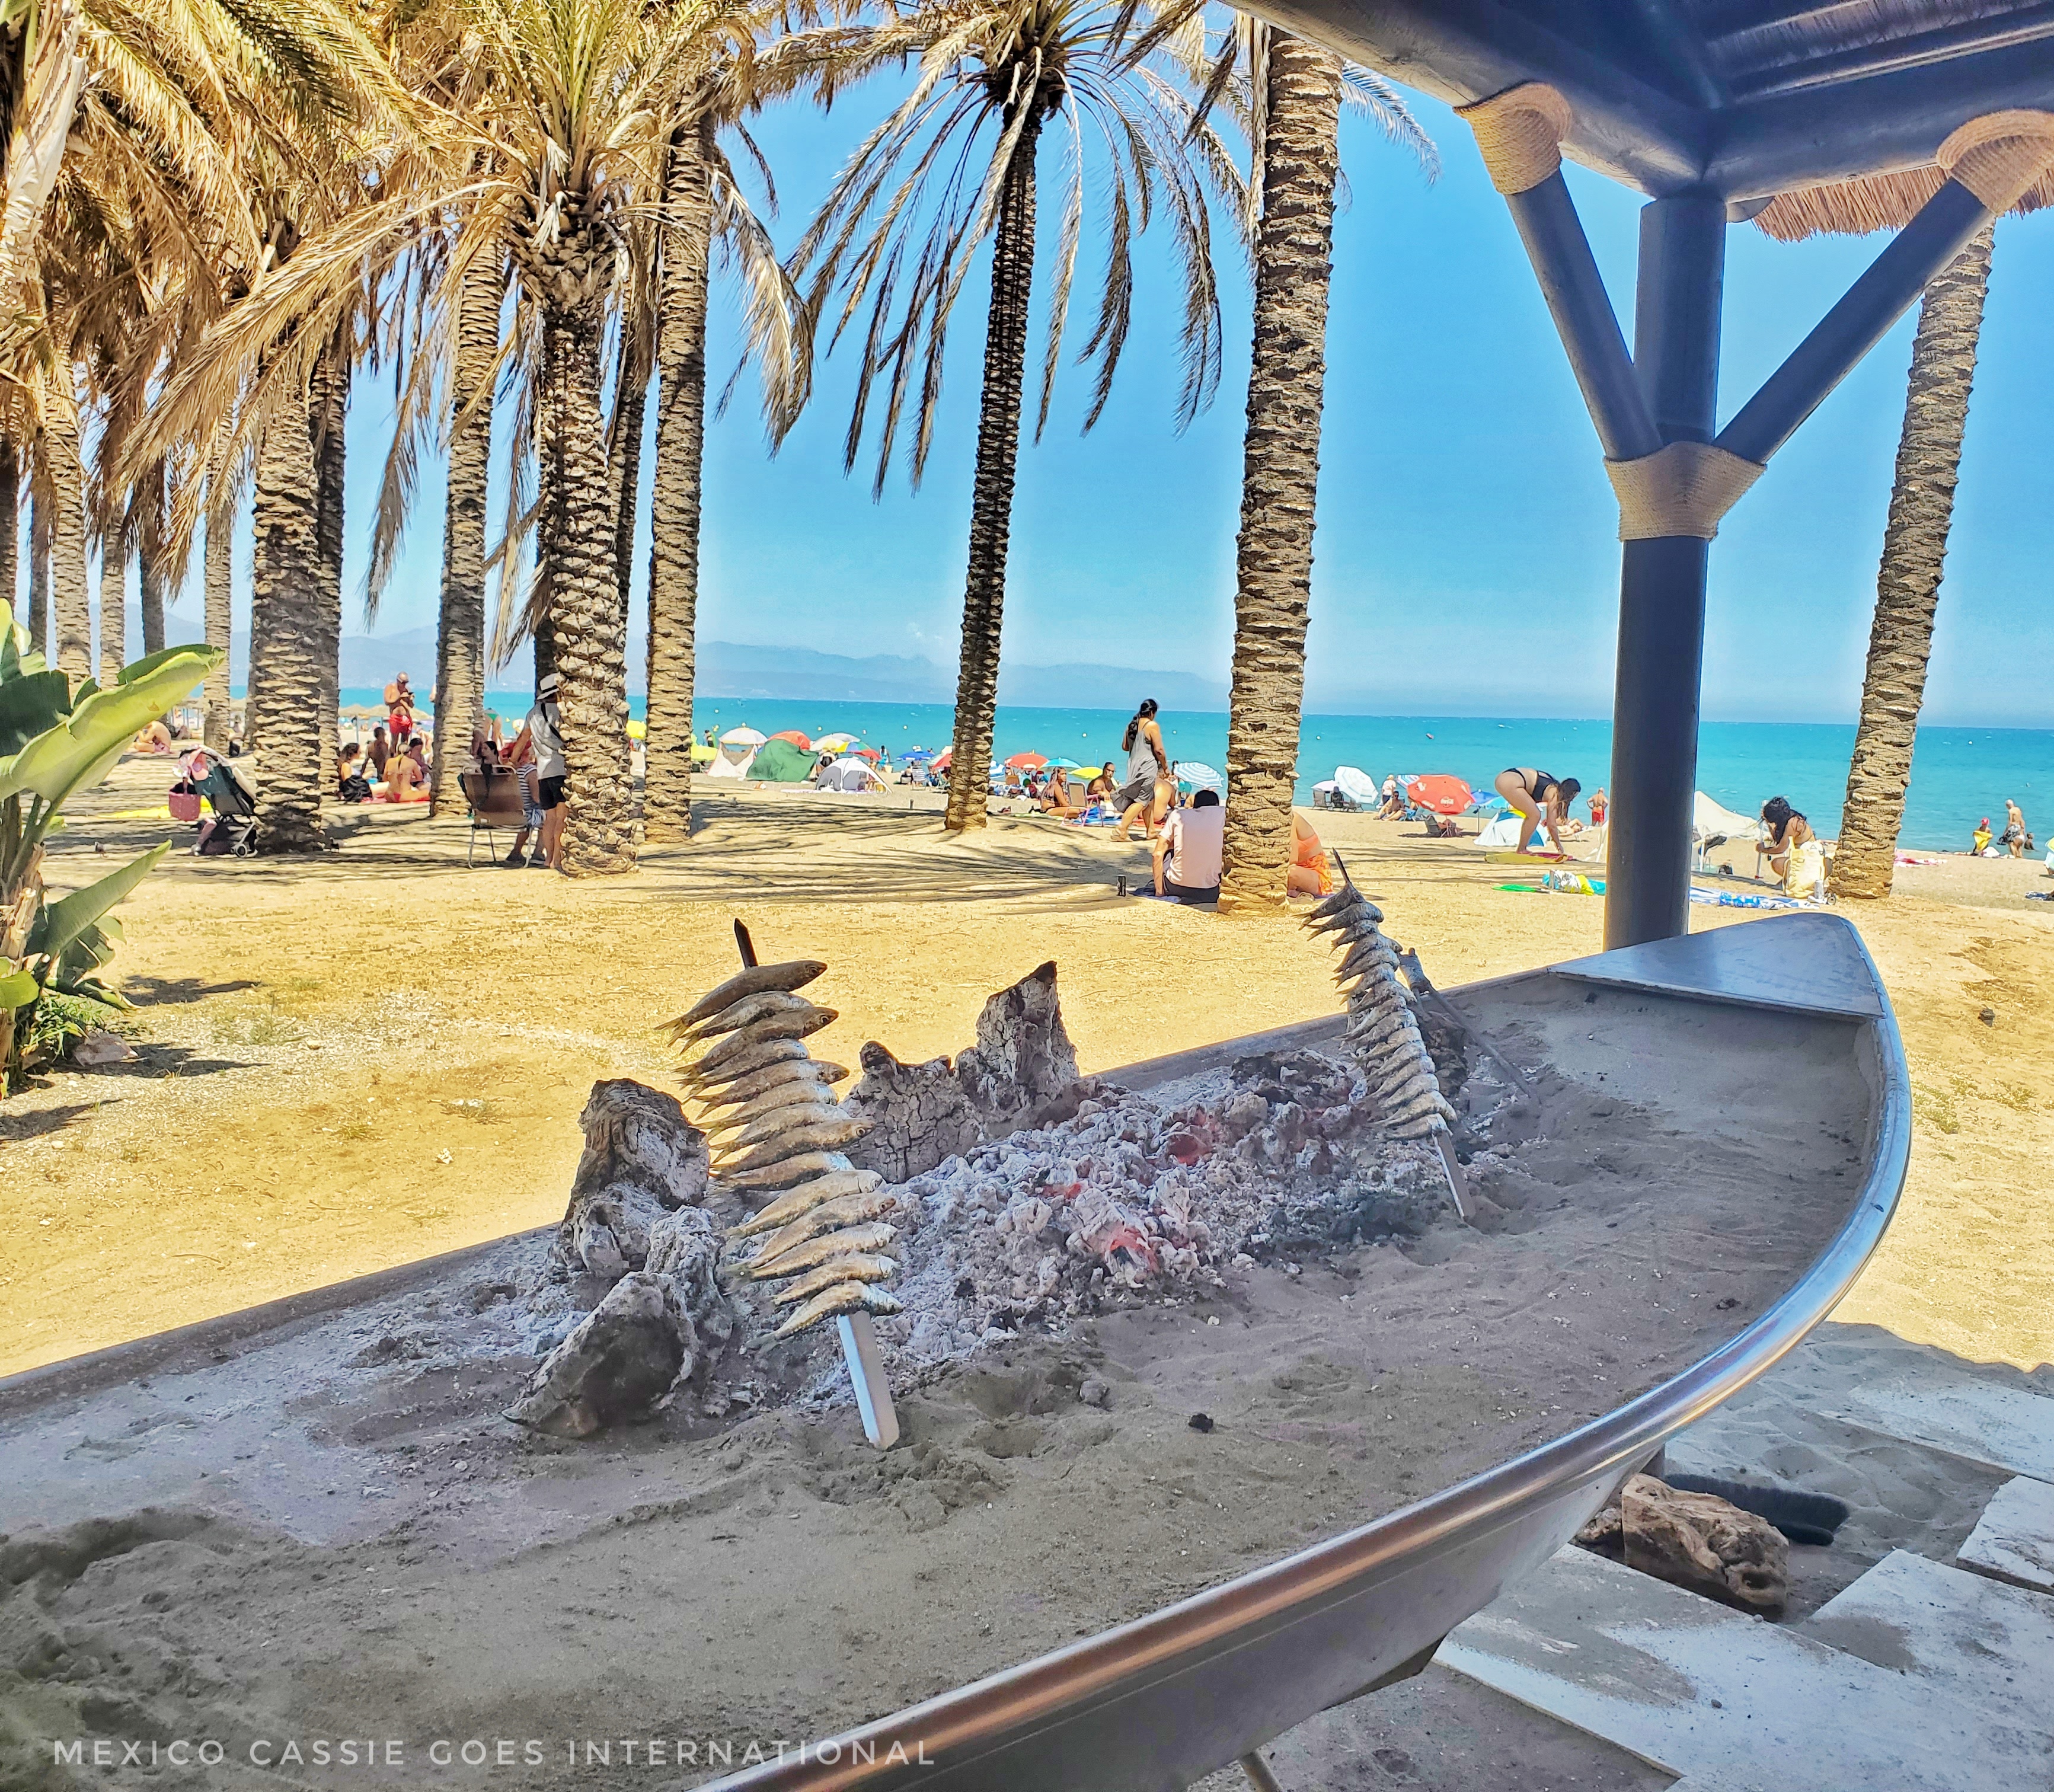 bbq pit with sardines cooking on sticks. palm trees on a sandy beach behind 